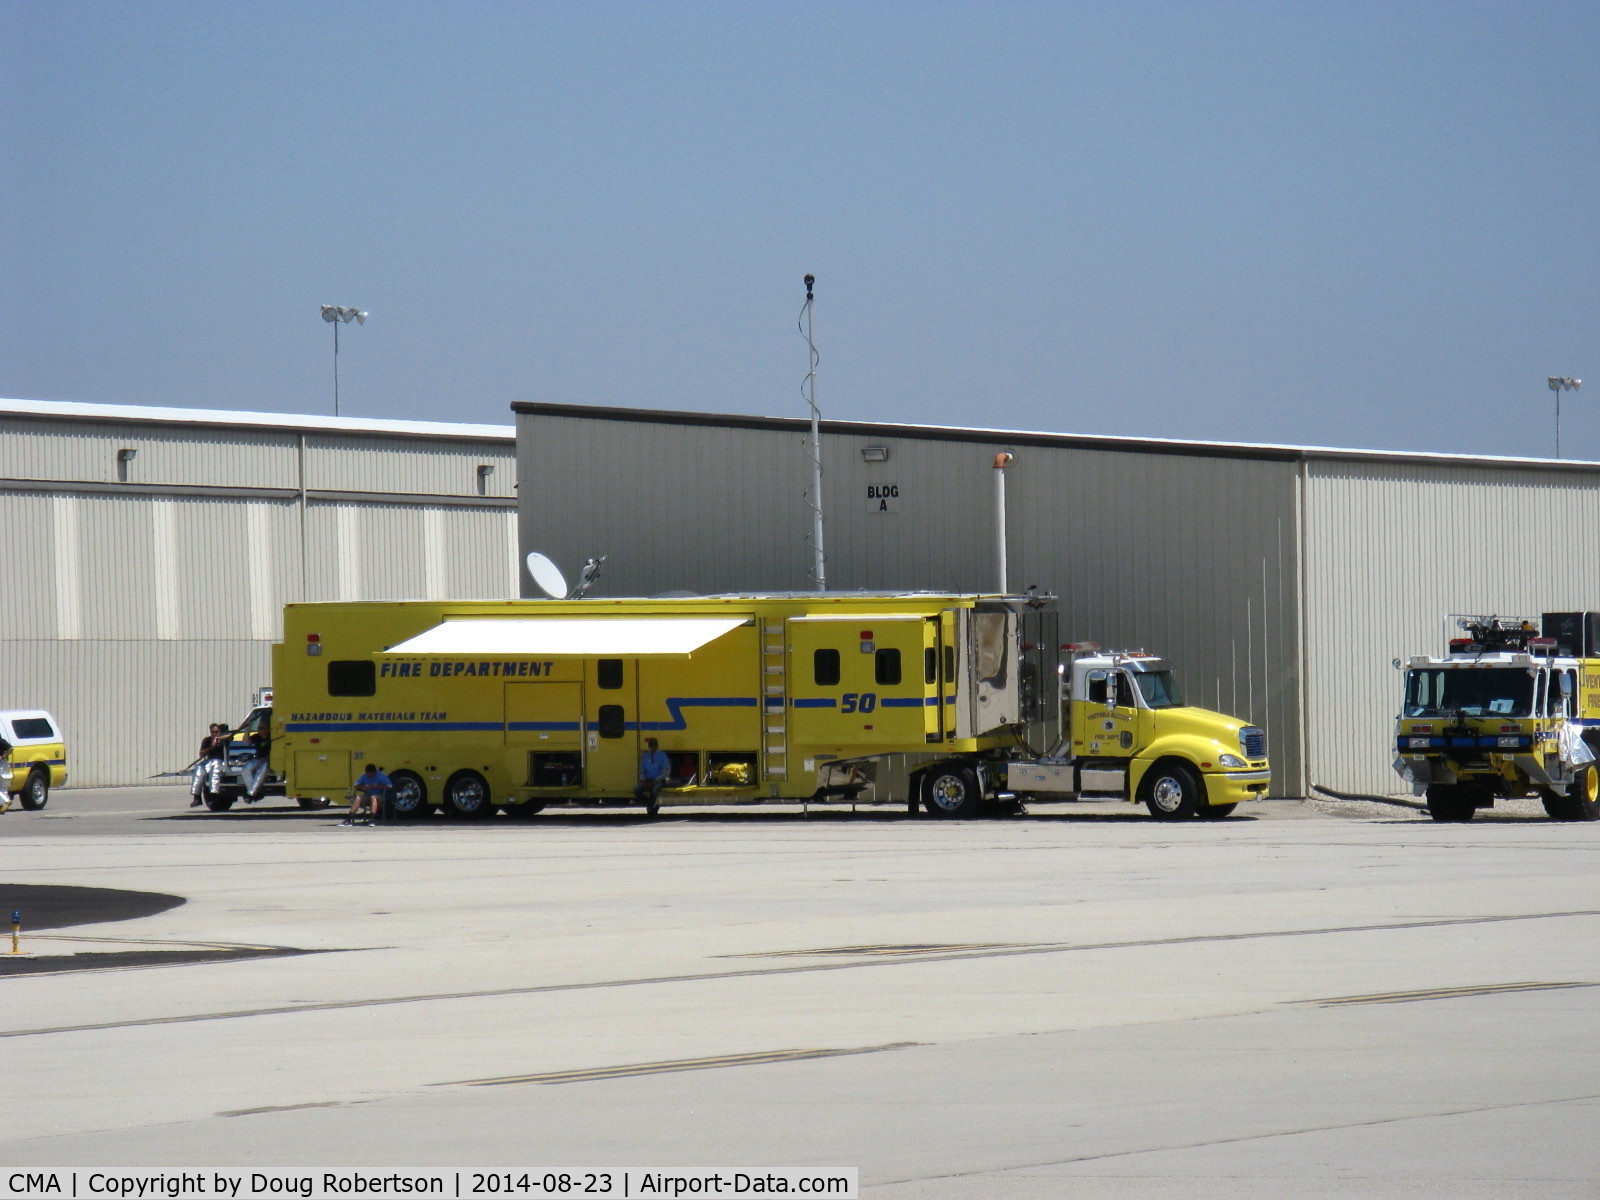 Camarillo Airport (CMA) - Ventura County Fire Department Airport Vehicles based at CMA Fire Station.